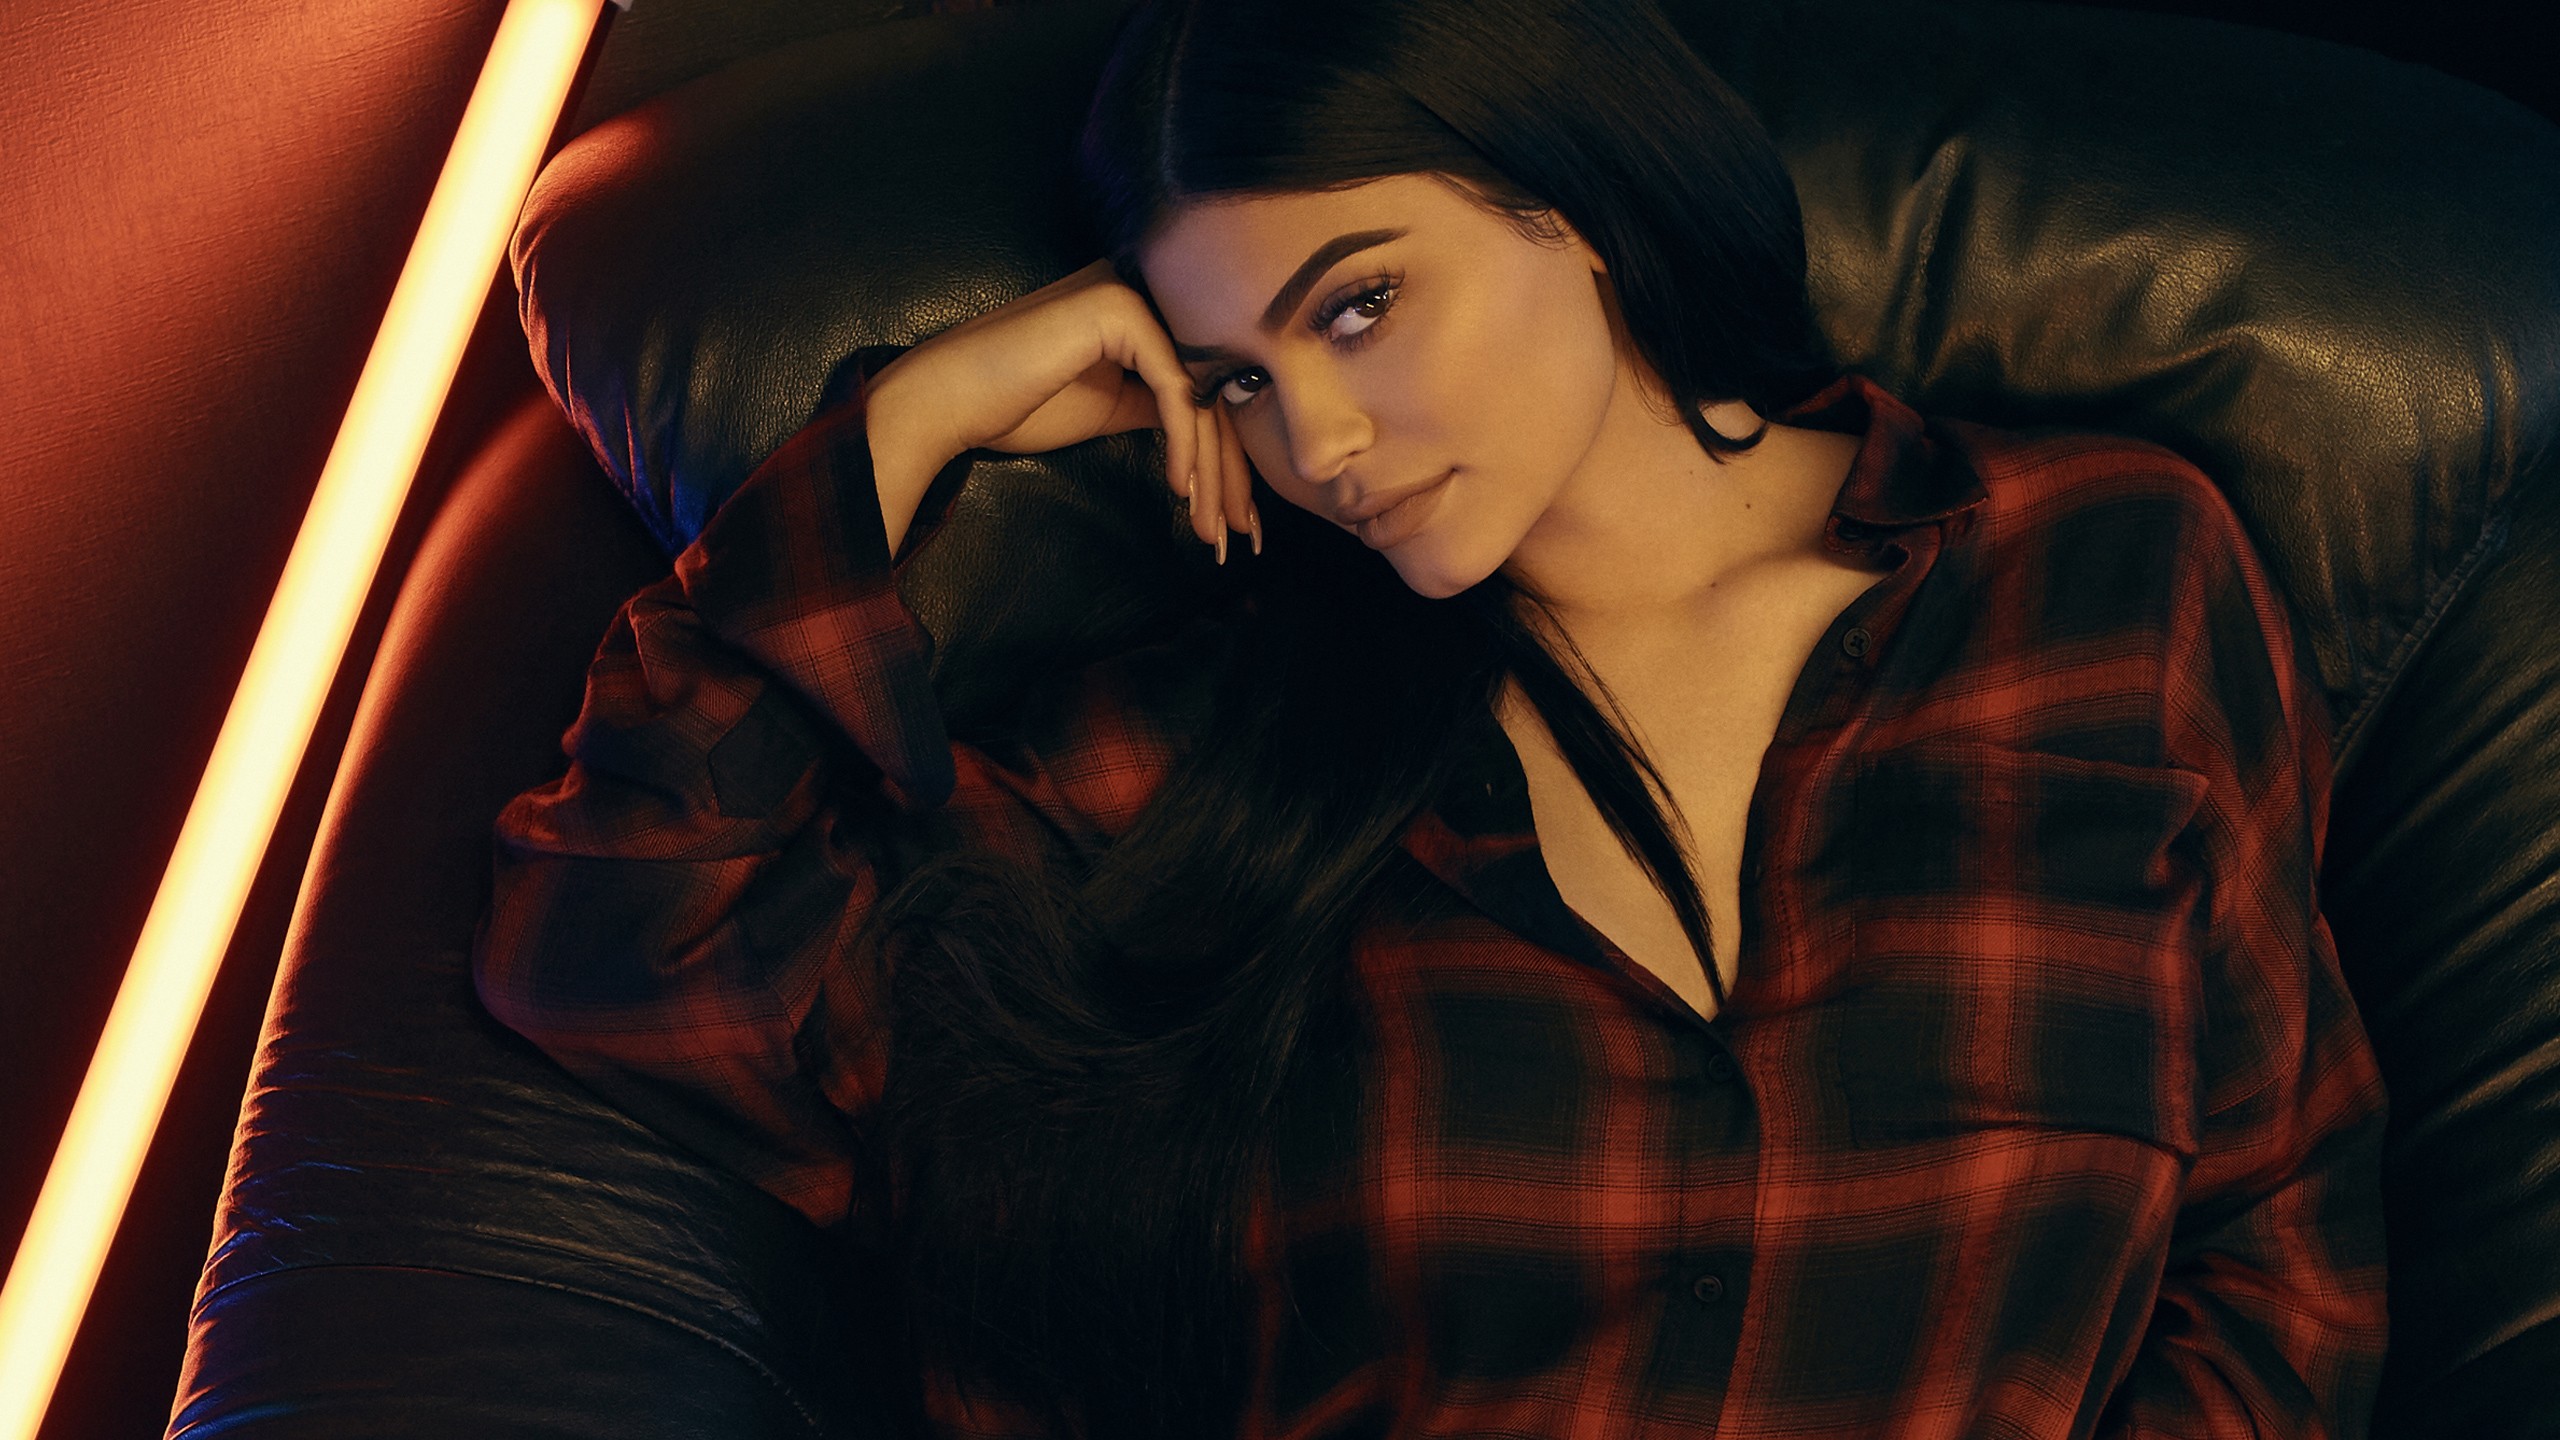 Kylie Jenner Puma Wallpapers